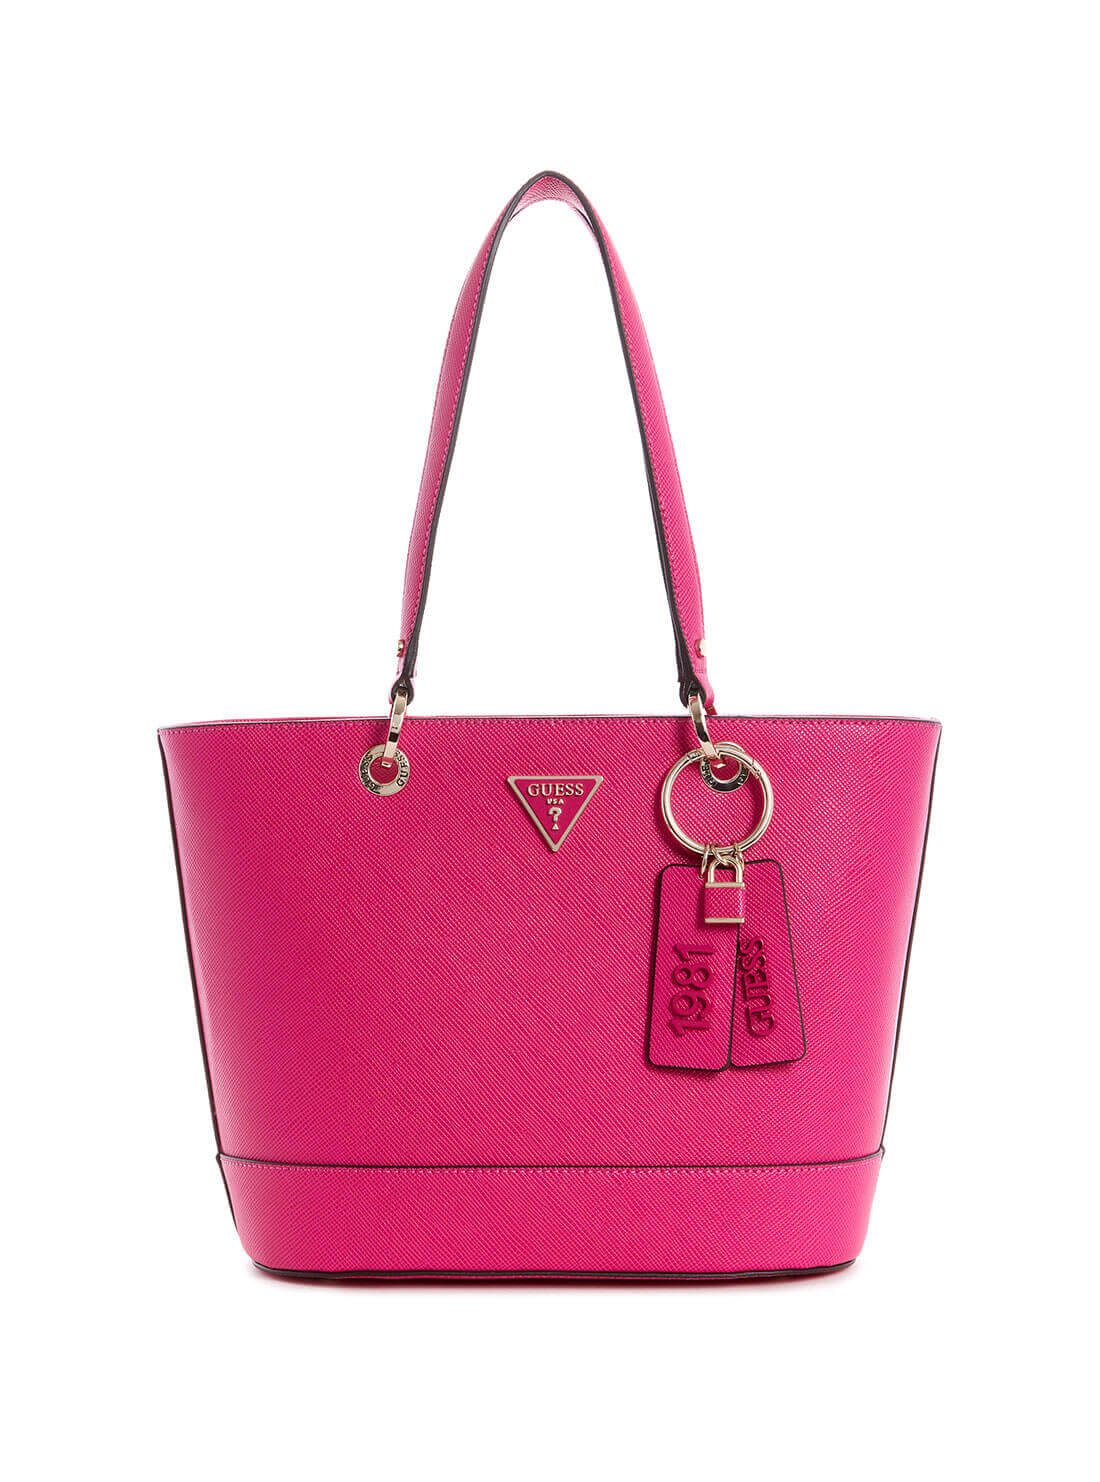 GUESS Womens  Hot Pink Noelle Small Elite Tote Bag ZG787922 Front View